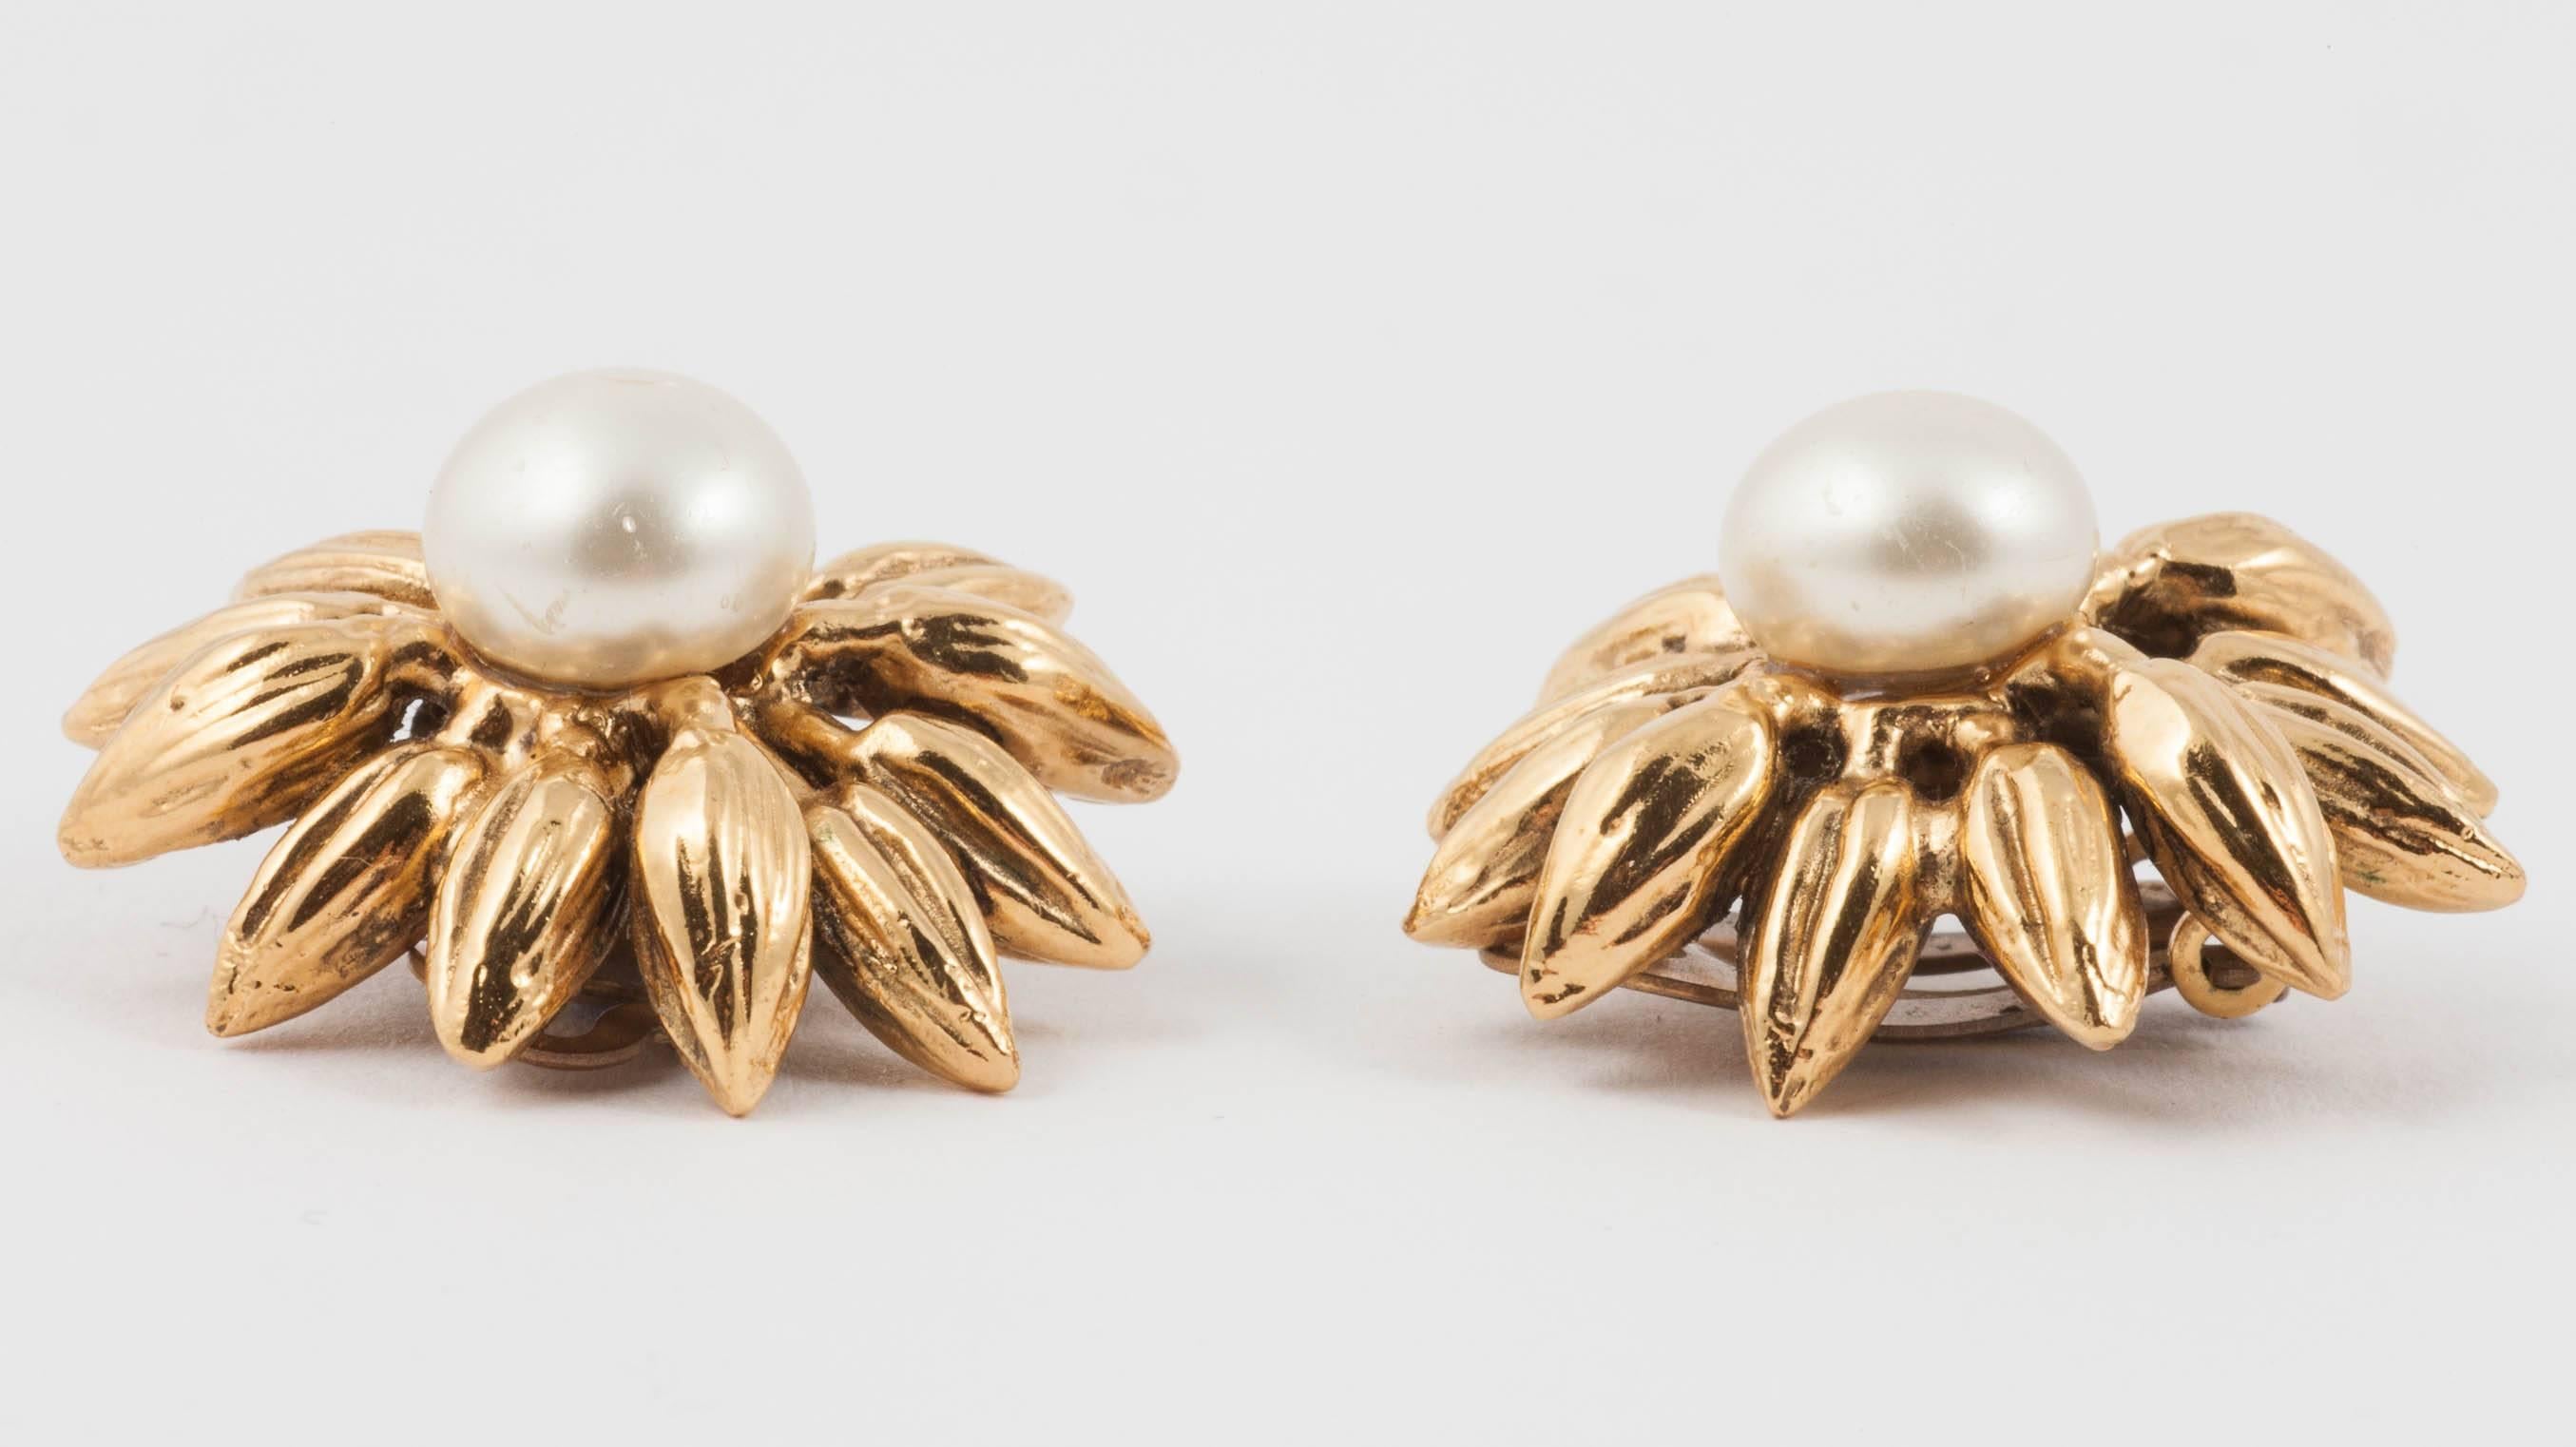 Classic and highly wearable, these exquisite earrings were hand made in Paris in the late 1950s/early 1960s by Maison Goossens in gilded metal and nacre for Chanel, timeless and chic, for so many varied occassions and all ages.
Not much needs to be